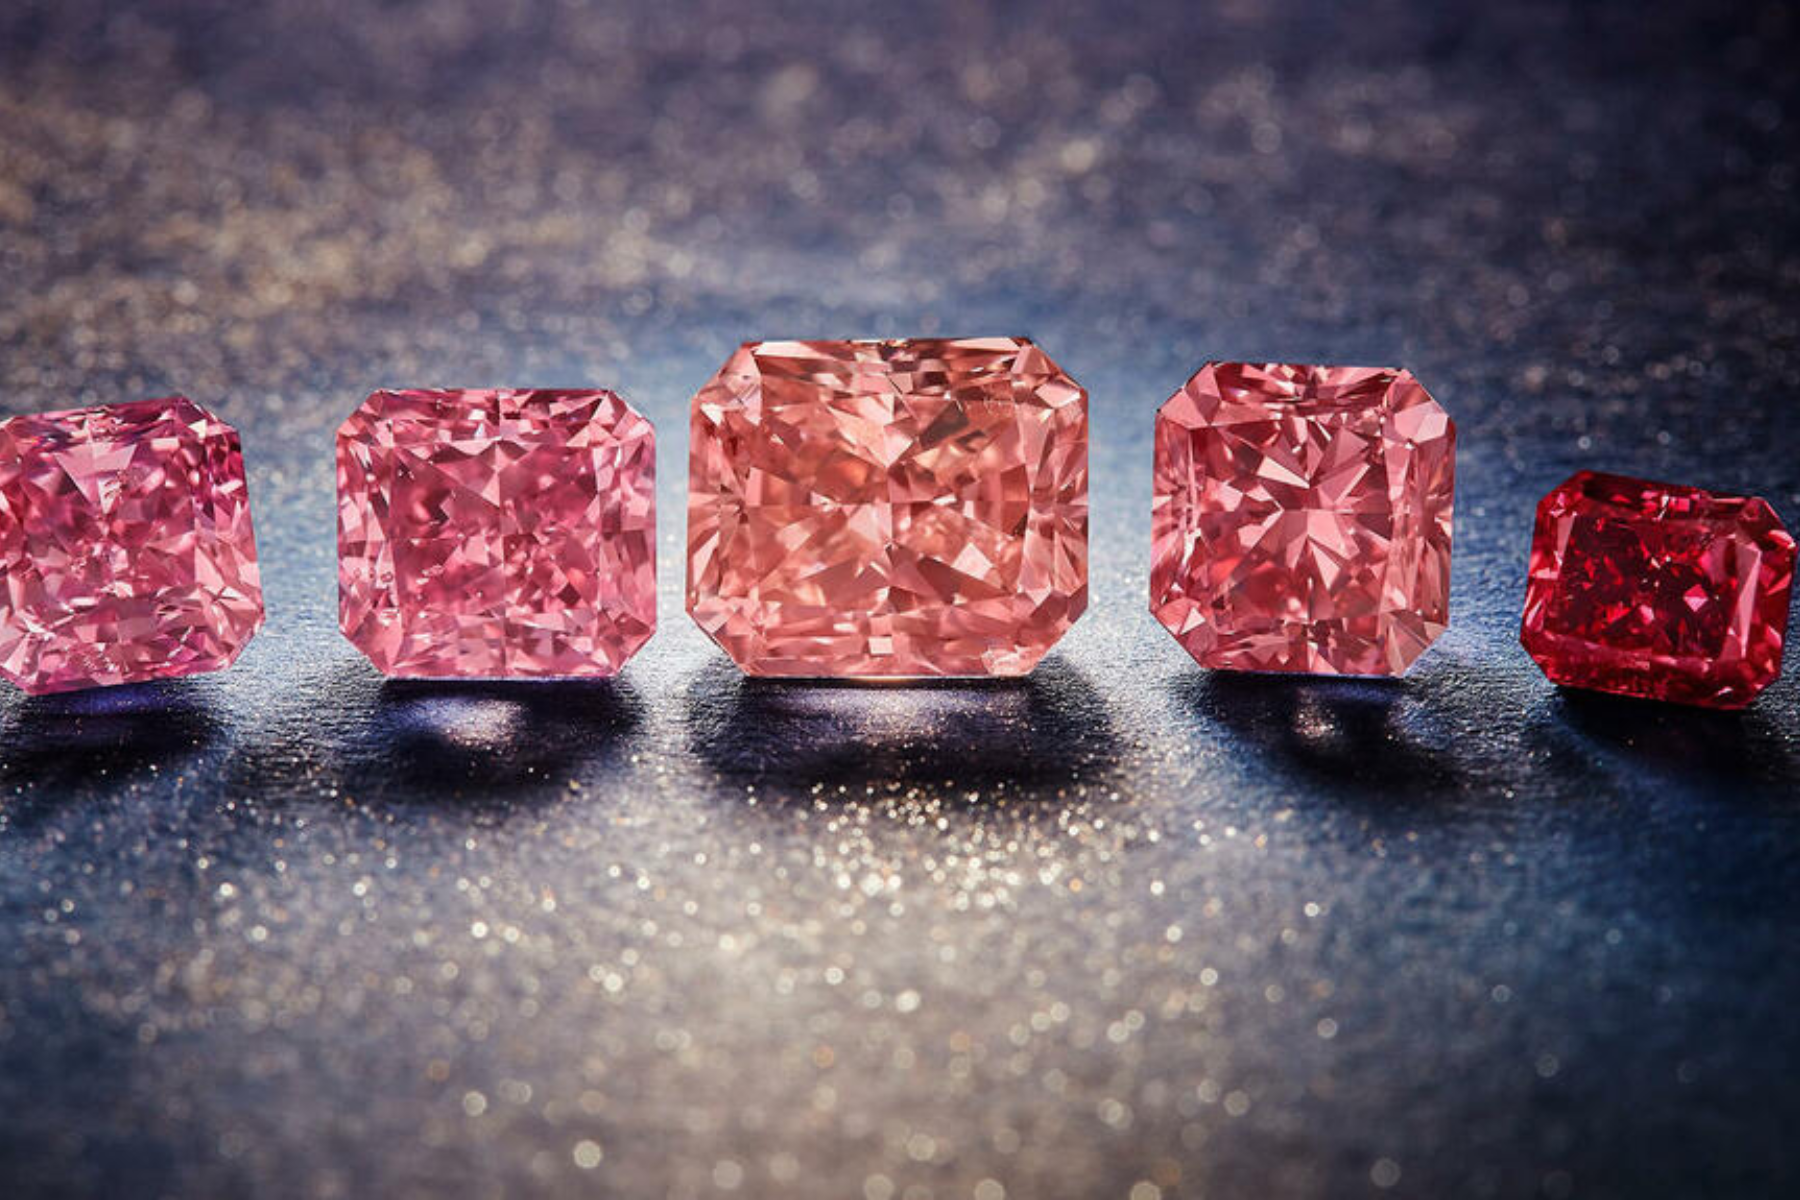 Five different sizes and shapes of argyle pink diamonds